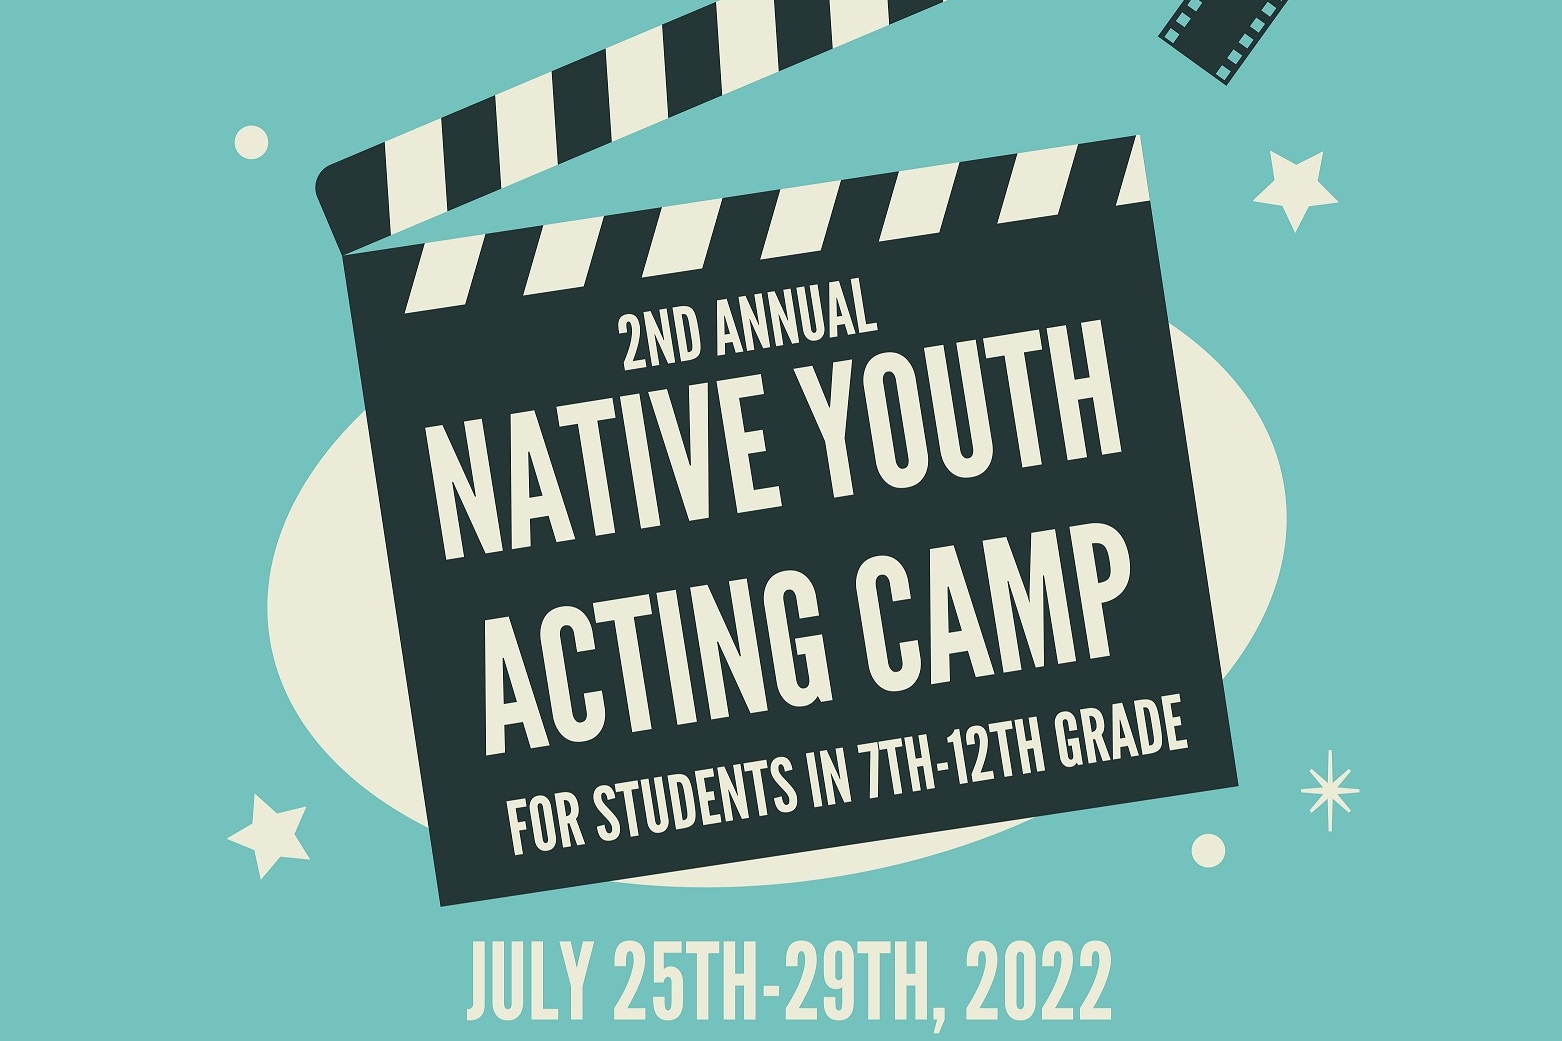 Flyer of the 2nd Annual Native Youth Acting Camp for students in 7th to 12th grade.